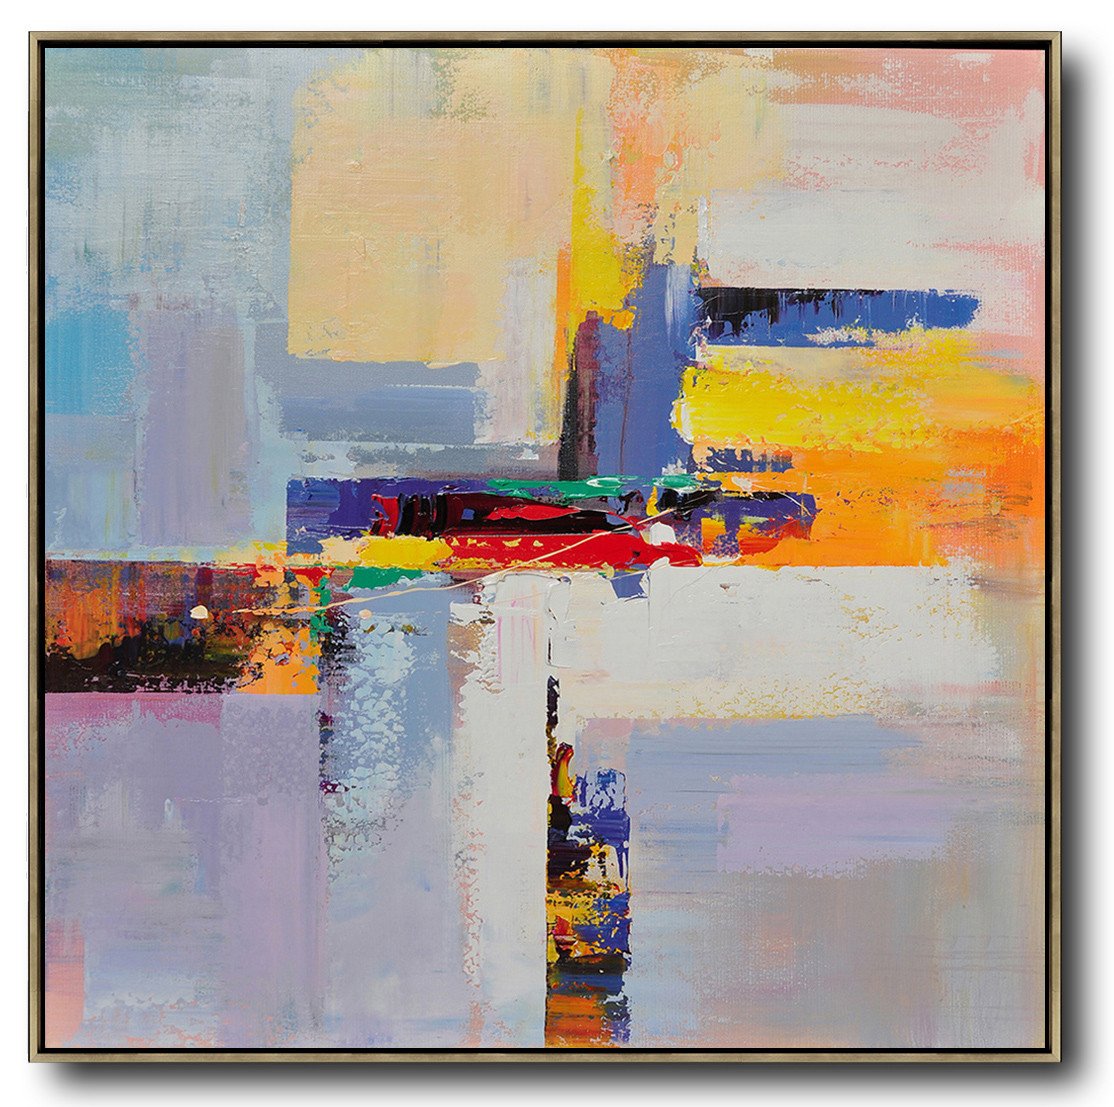 Reviews: Hand-painted oversized Palette Knife Painting Contemporary Art on canvas, large square canvas art - Abstract Canvas Art Large